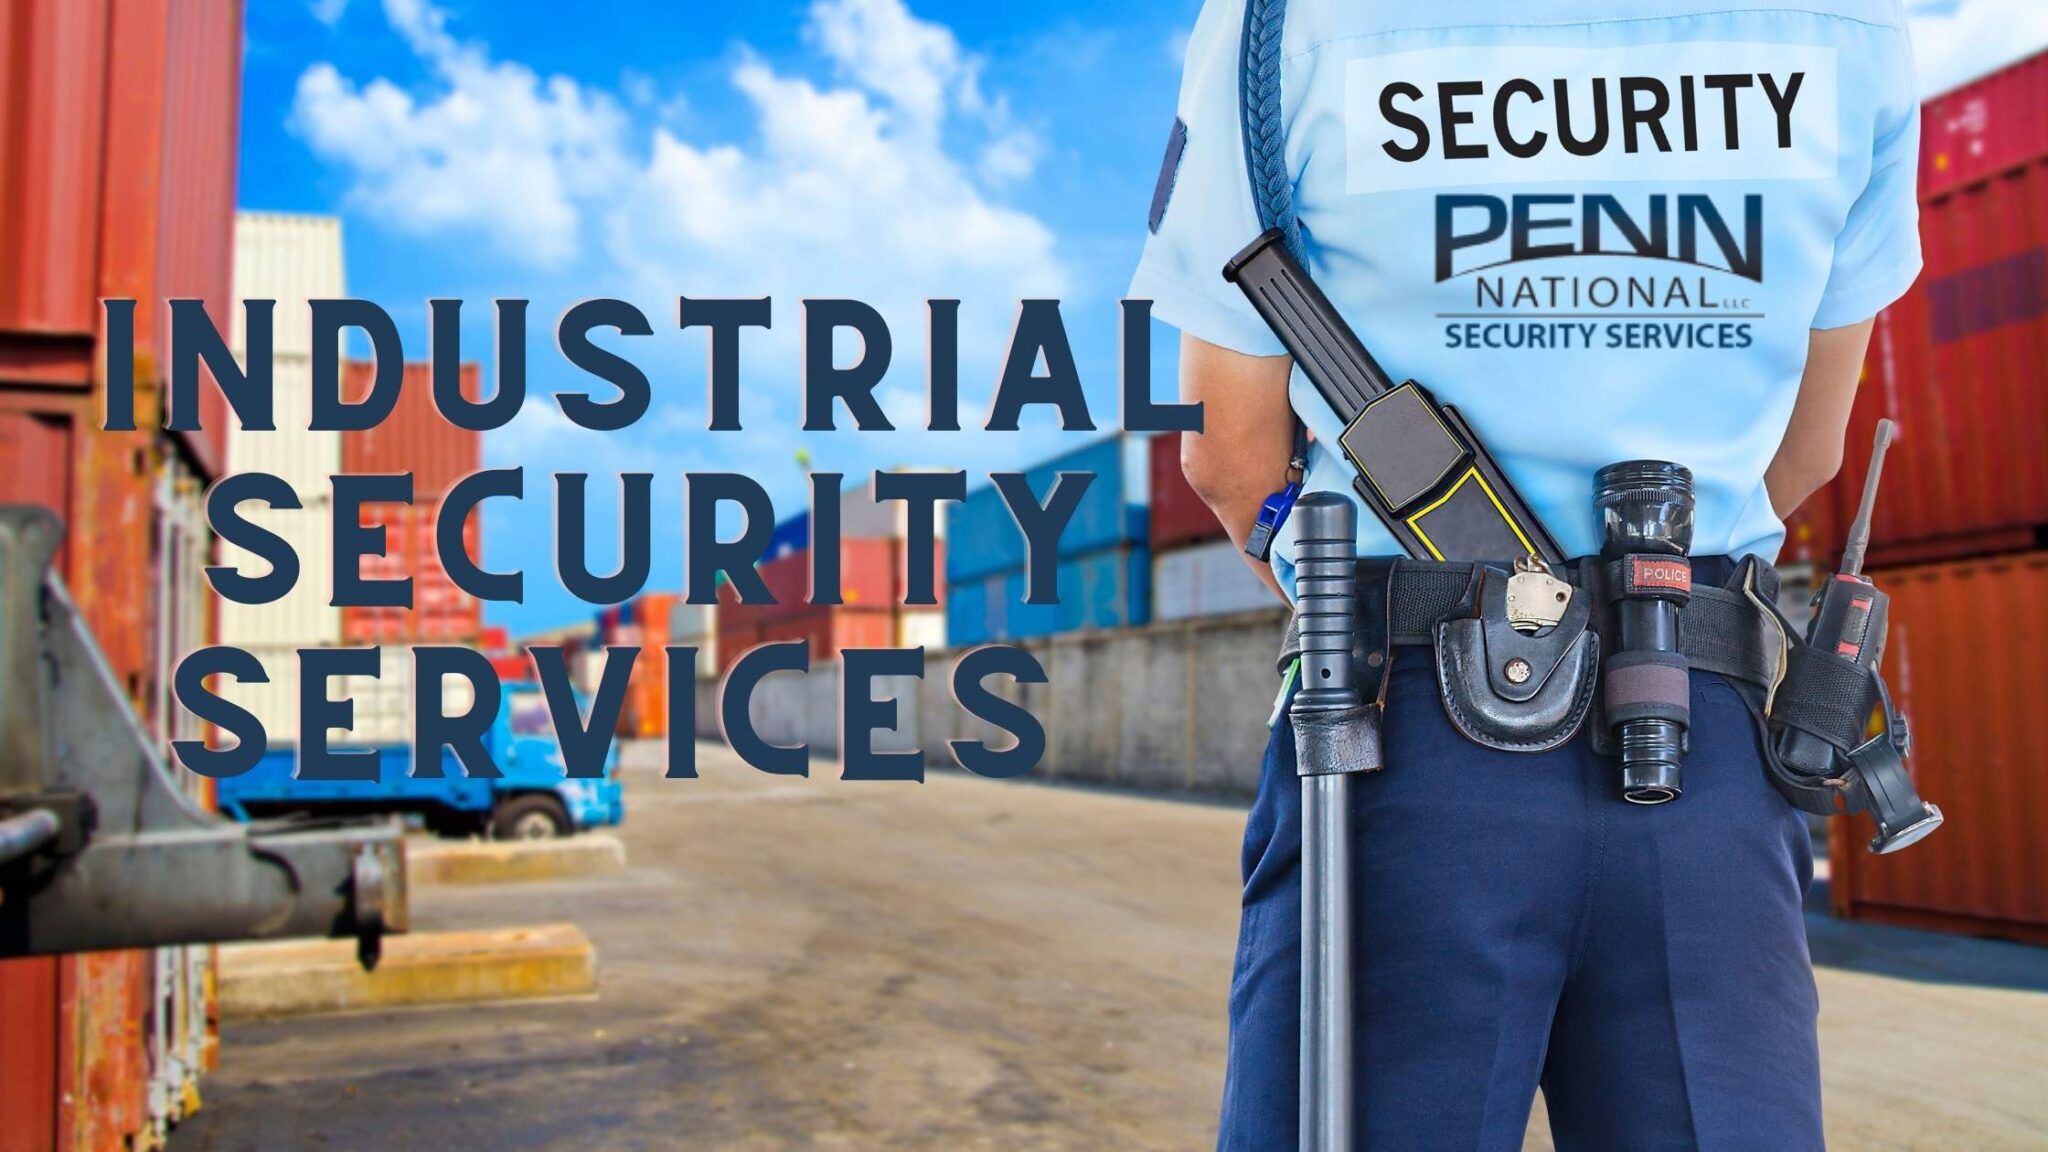 Industrial security services